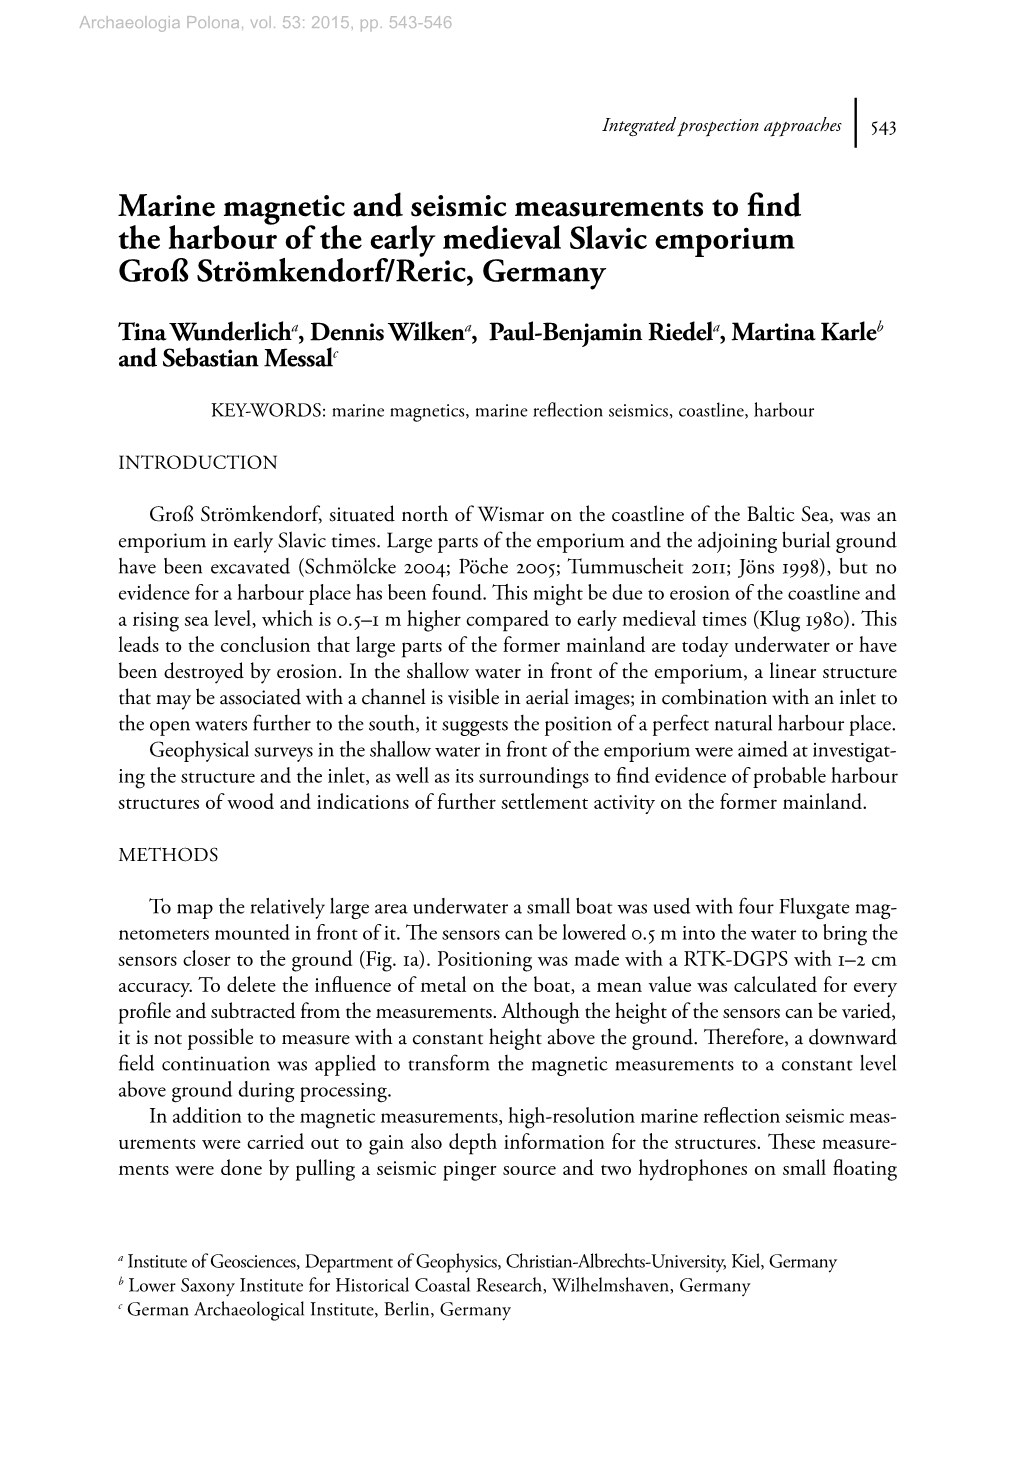 Marine Magnetic and Seismic Measurements to Find the Harbour of the Early Medieval Slavic Emporium Groß Strömkendorf/Reric, Germany